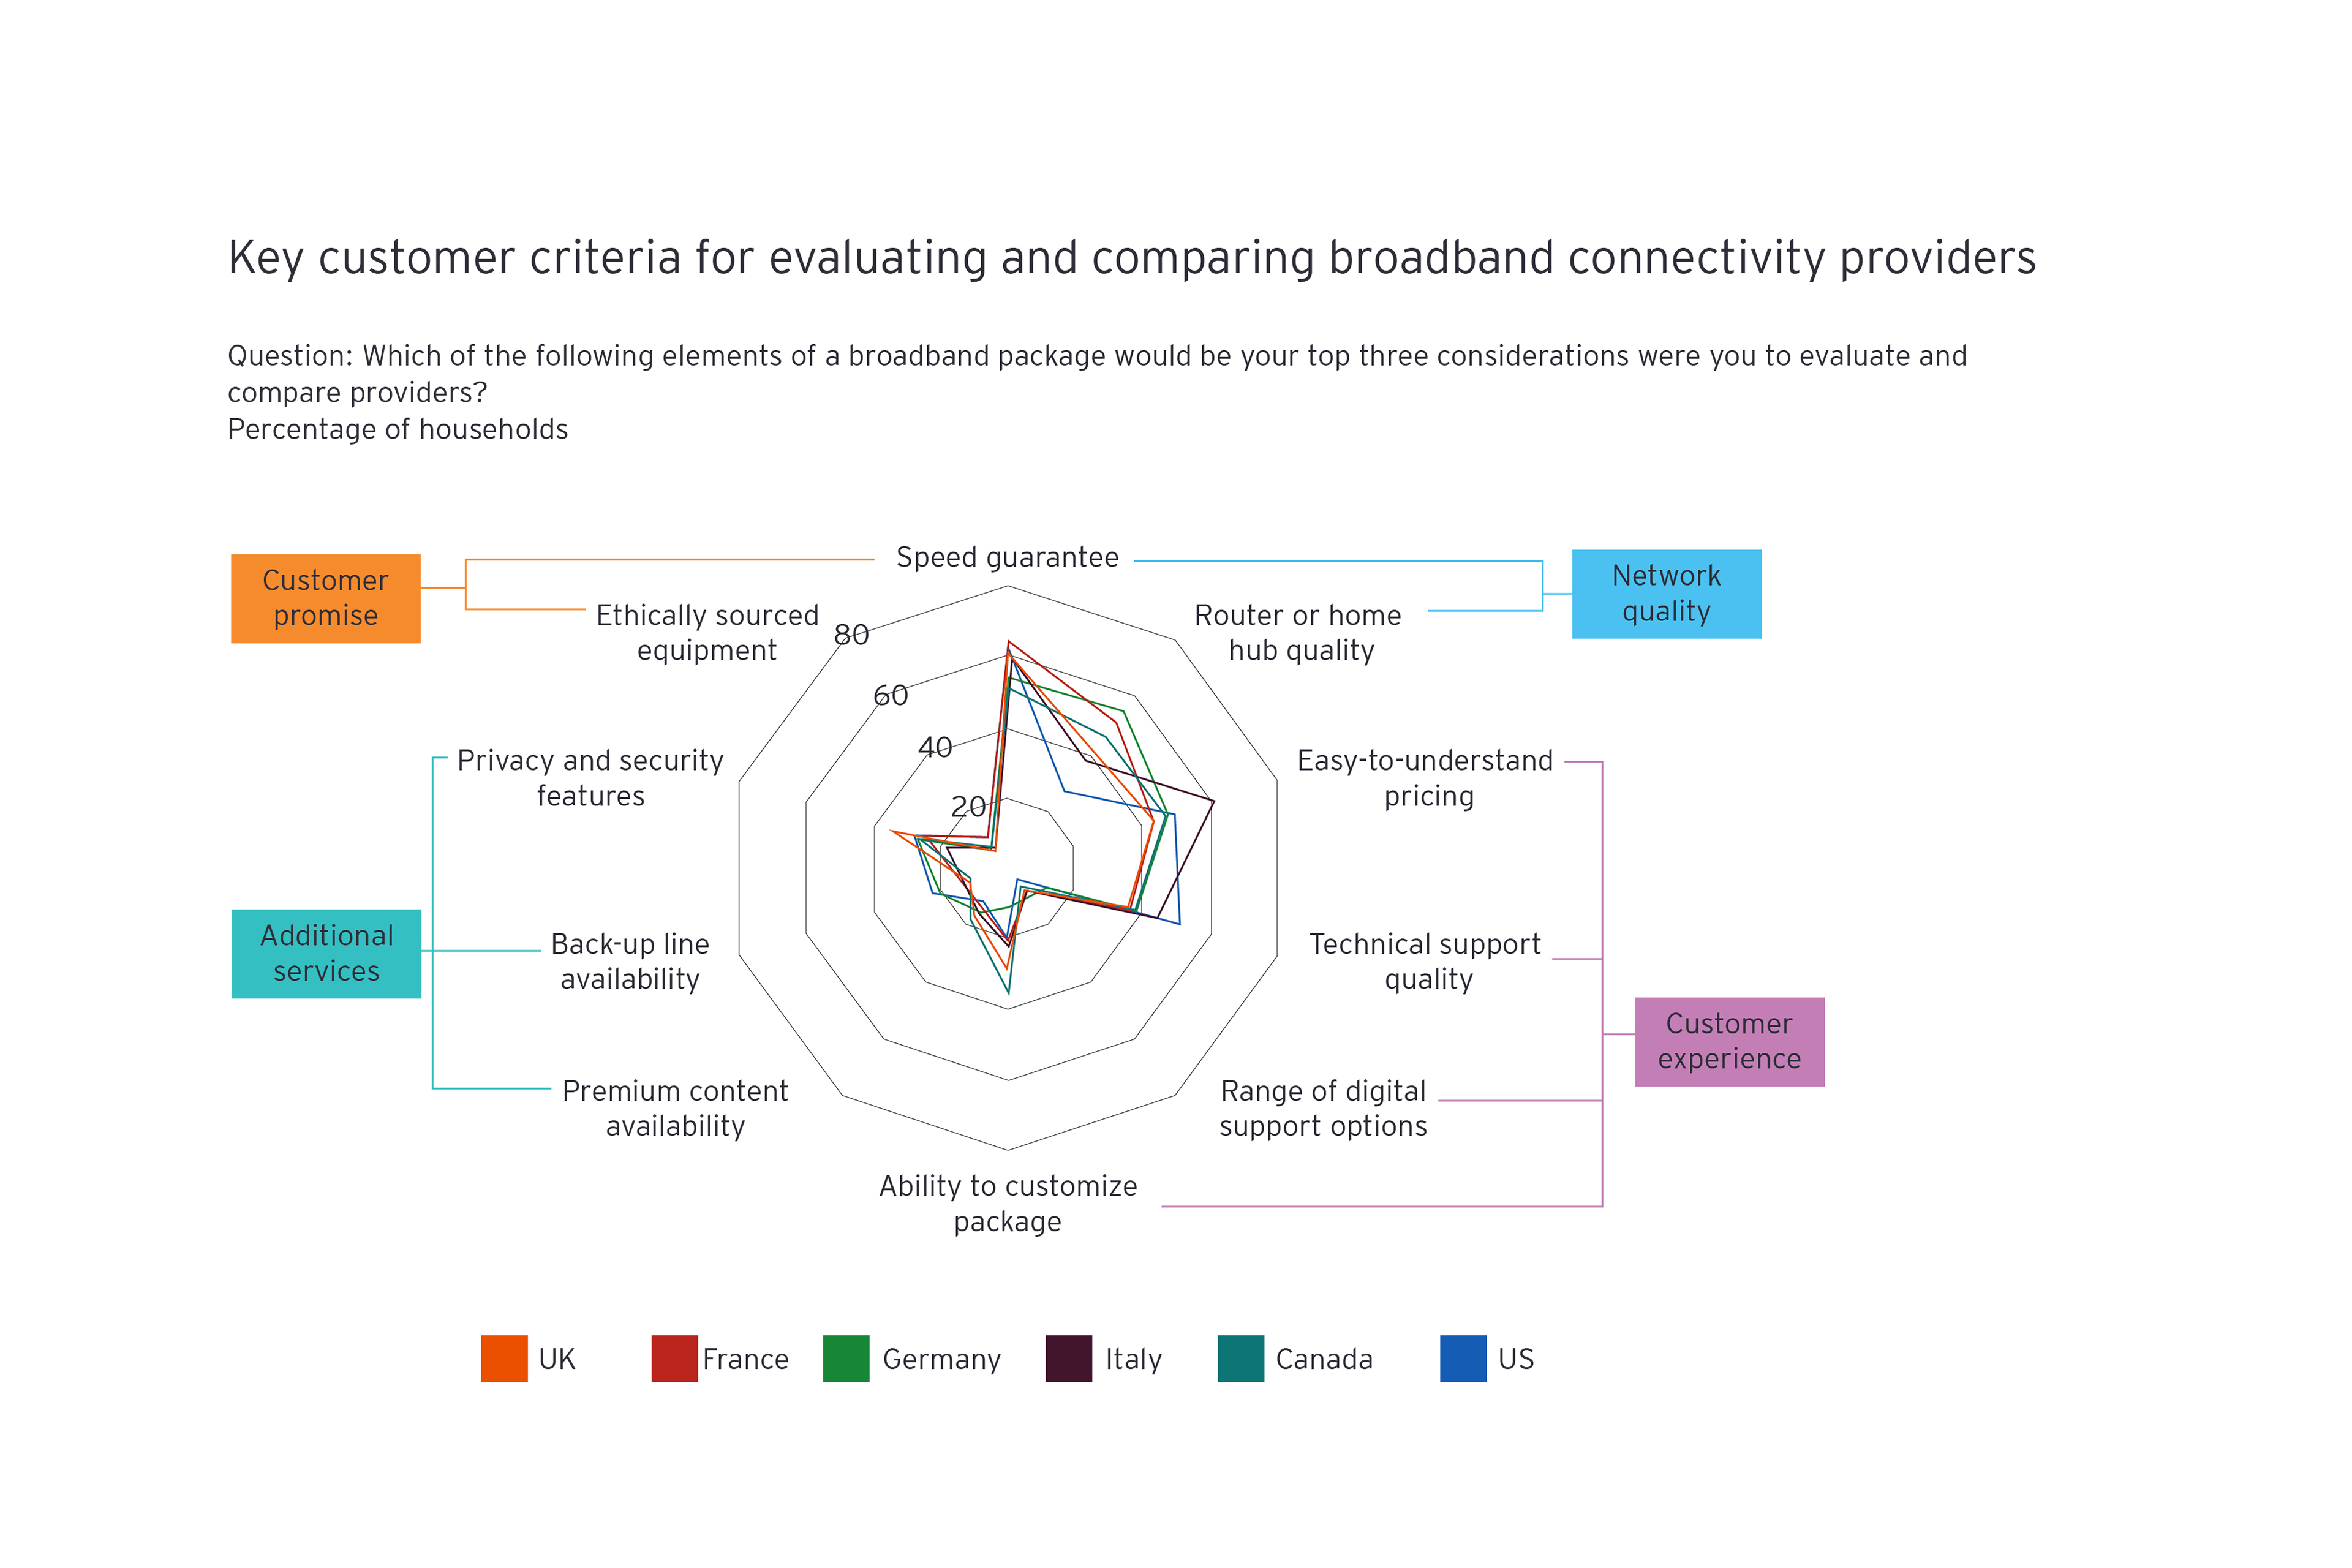 Key customer criteria for evaluating and comparing broadband connectivity providers